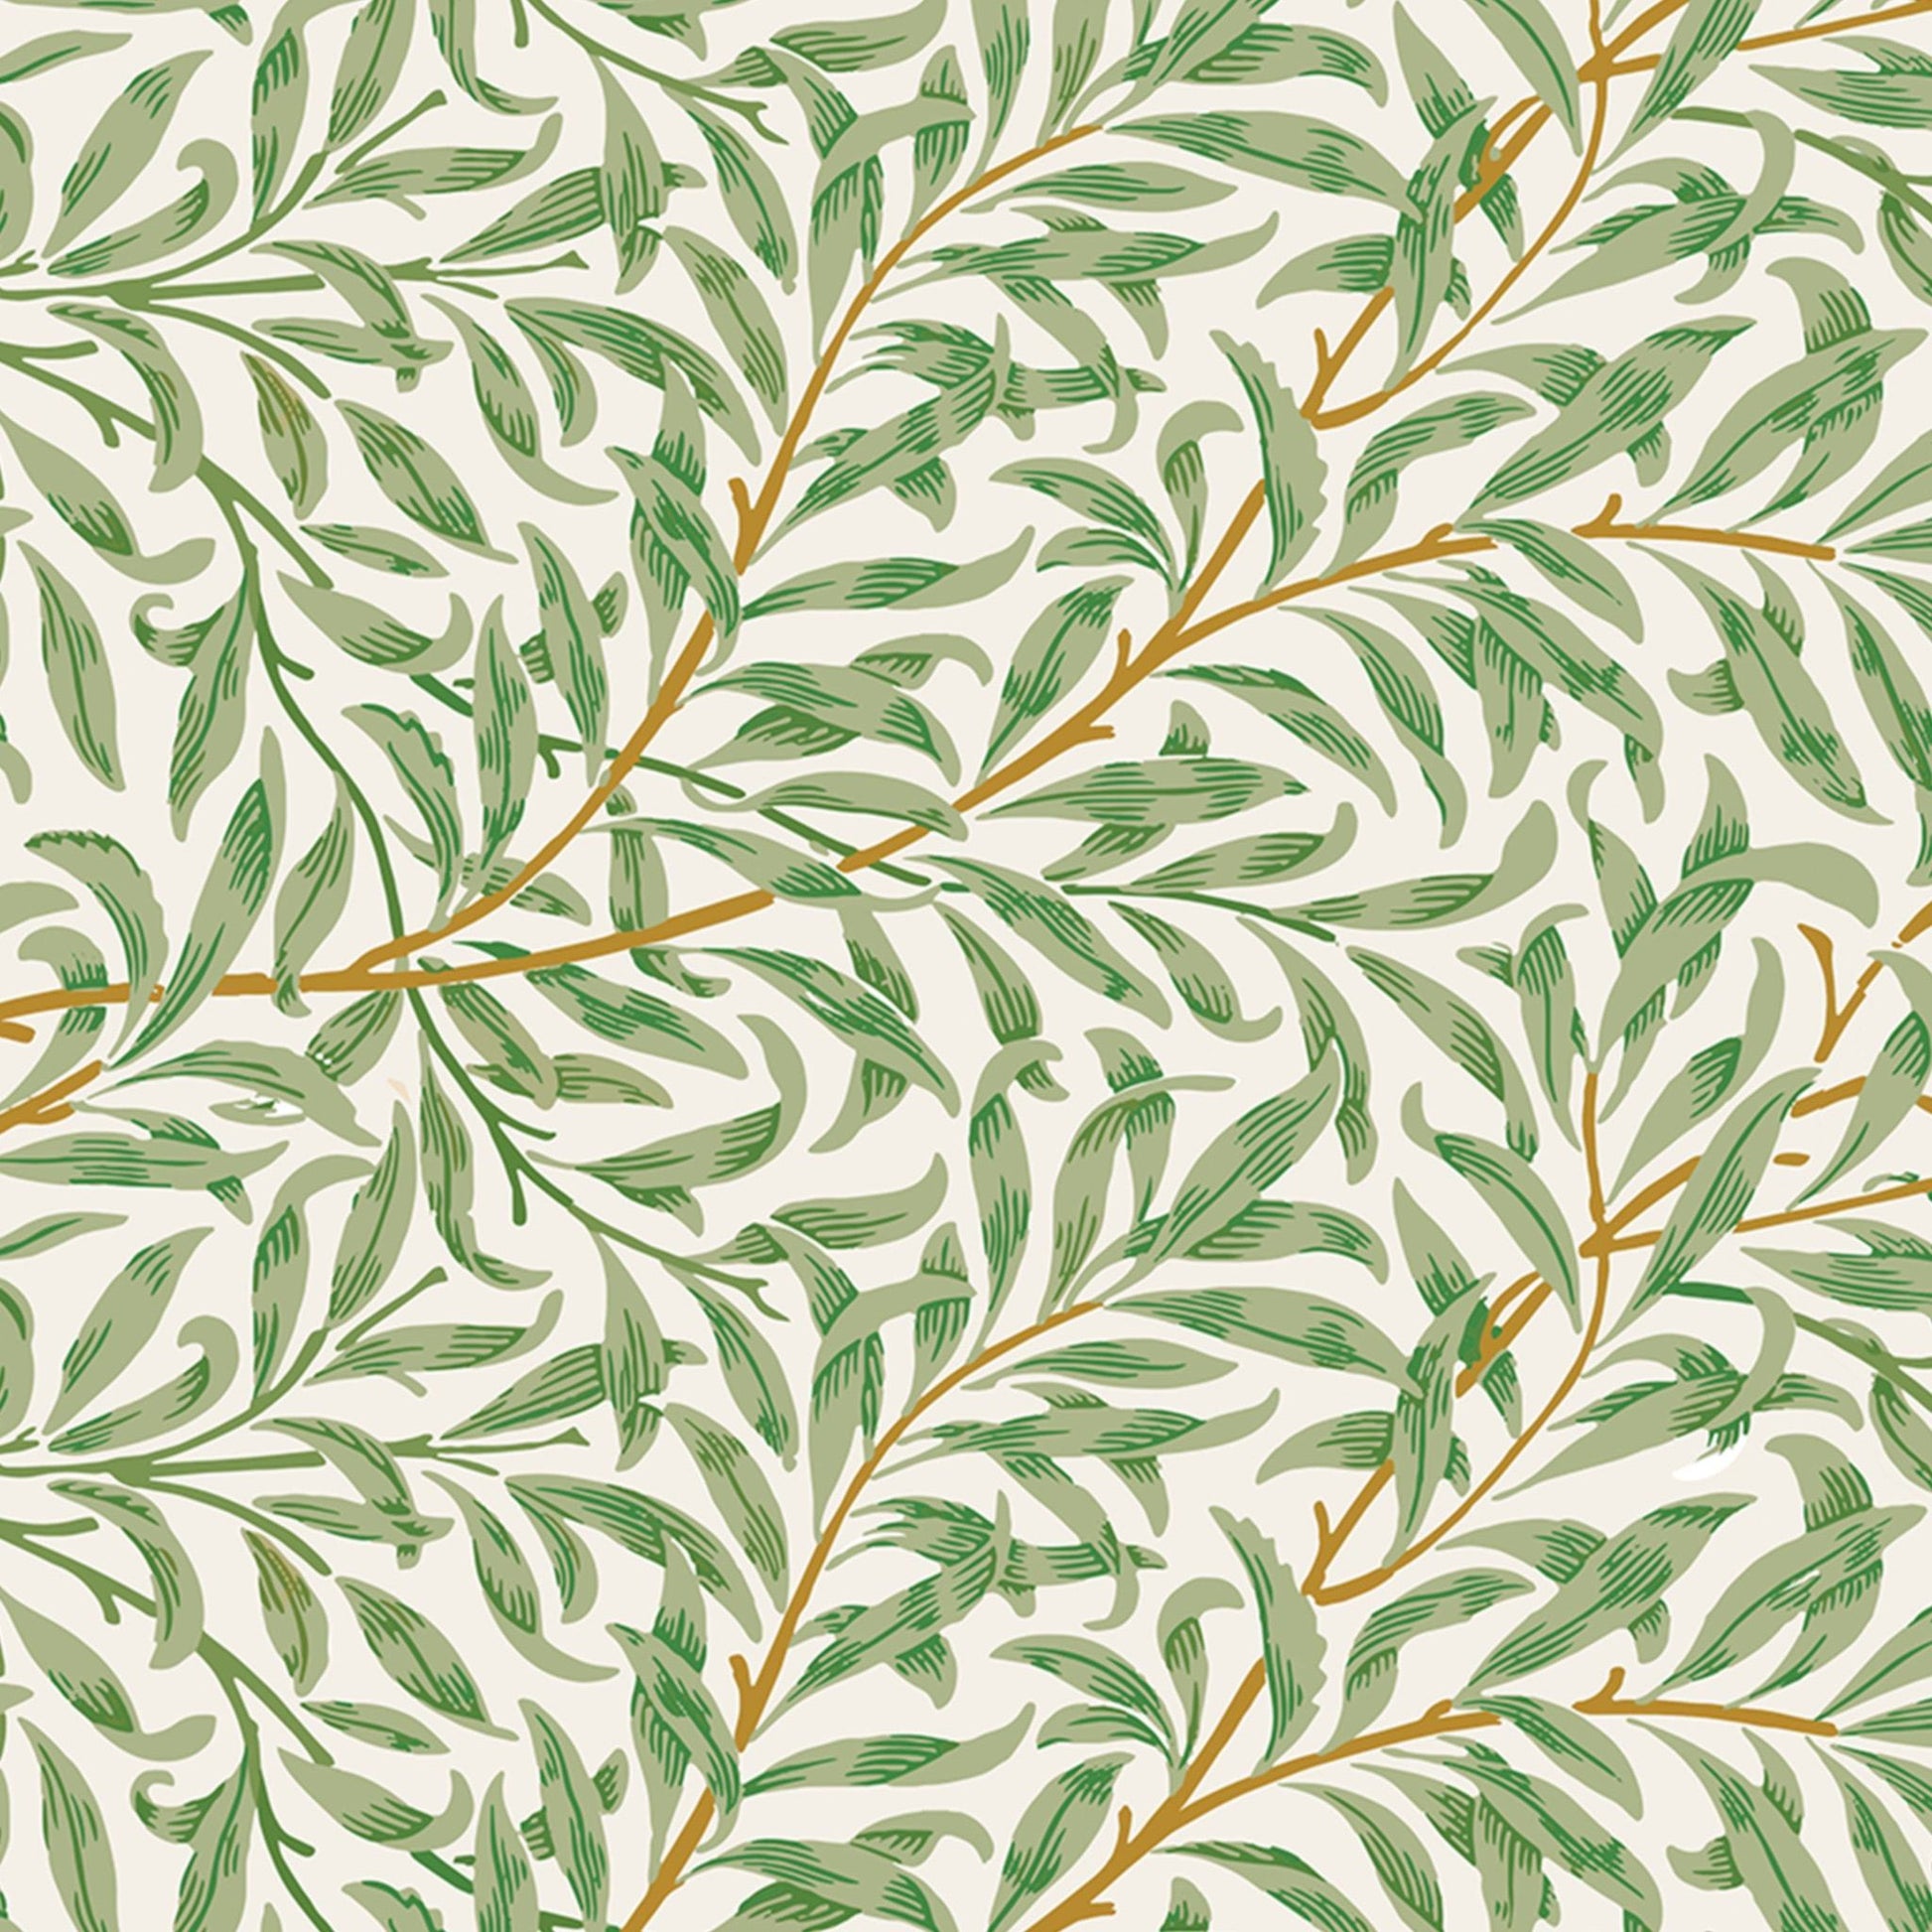 THE MASTER HERBALIST LAVENDER & NEEM OIL Scented Drawer Liners in a WILLIAM MORRIS Inspired Design | Natural ANTI-MOTH Repellent . Made in Britain.